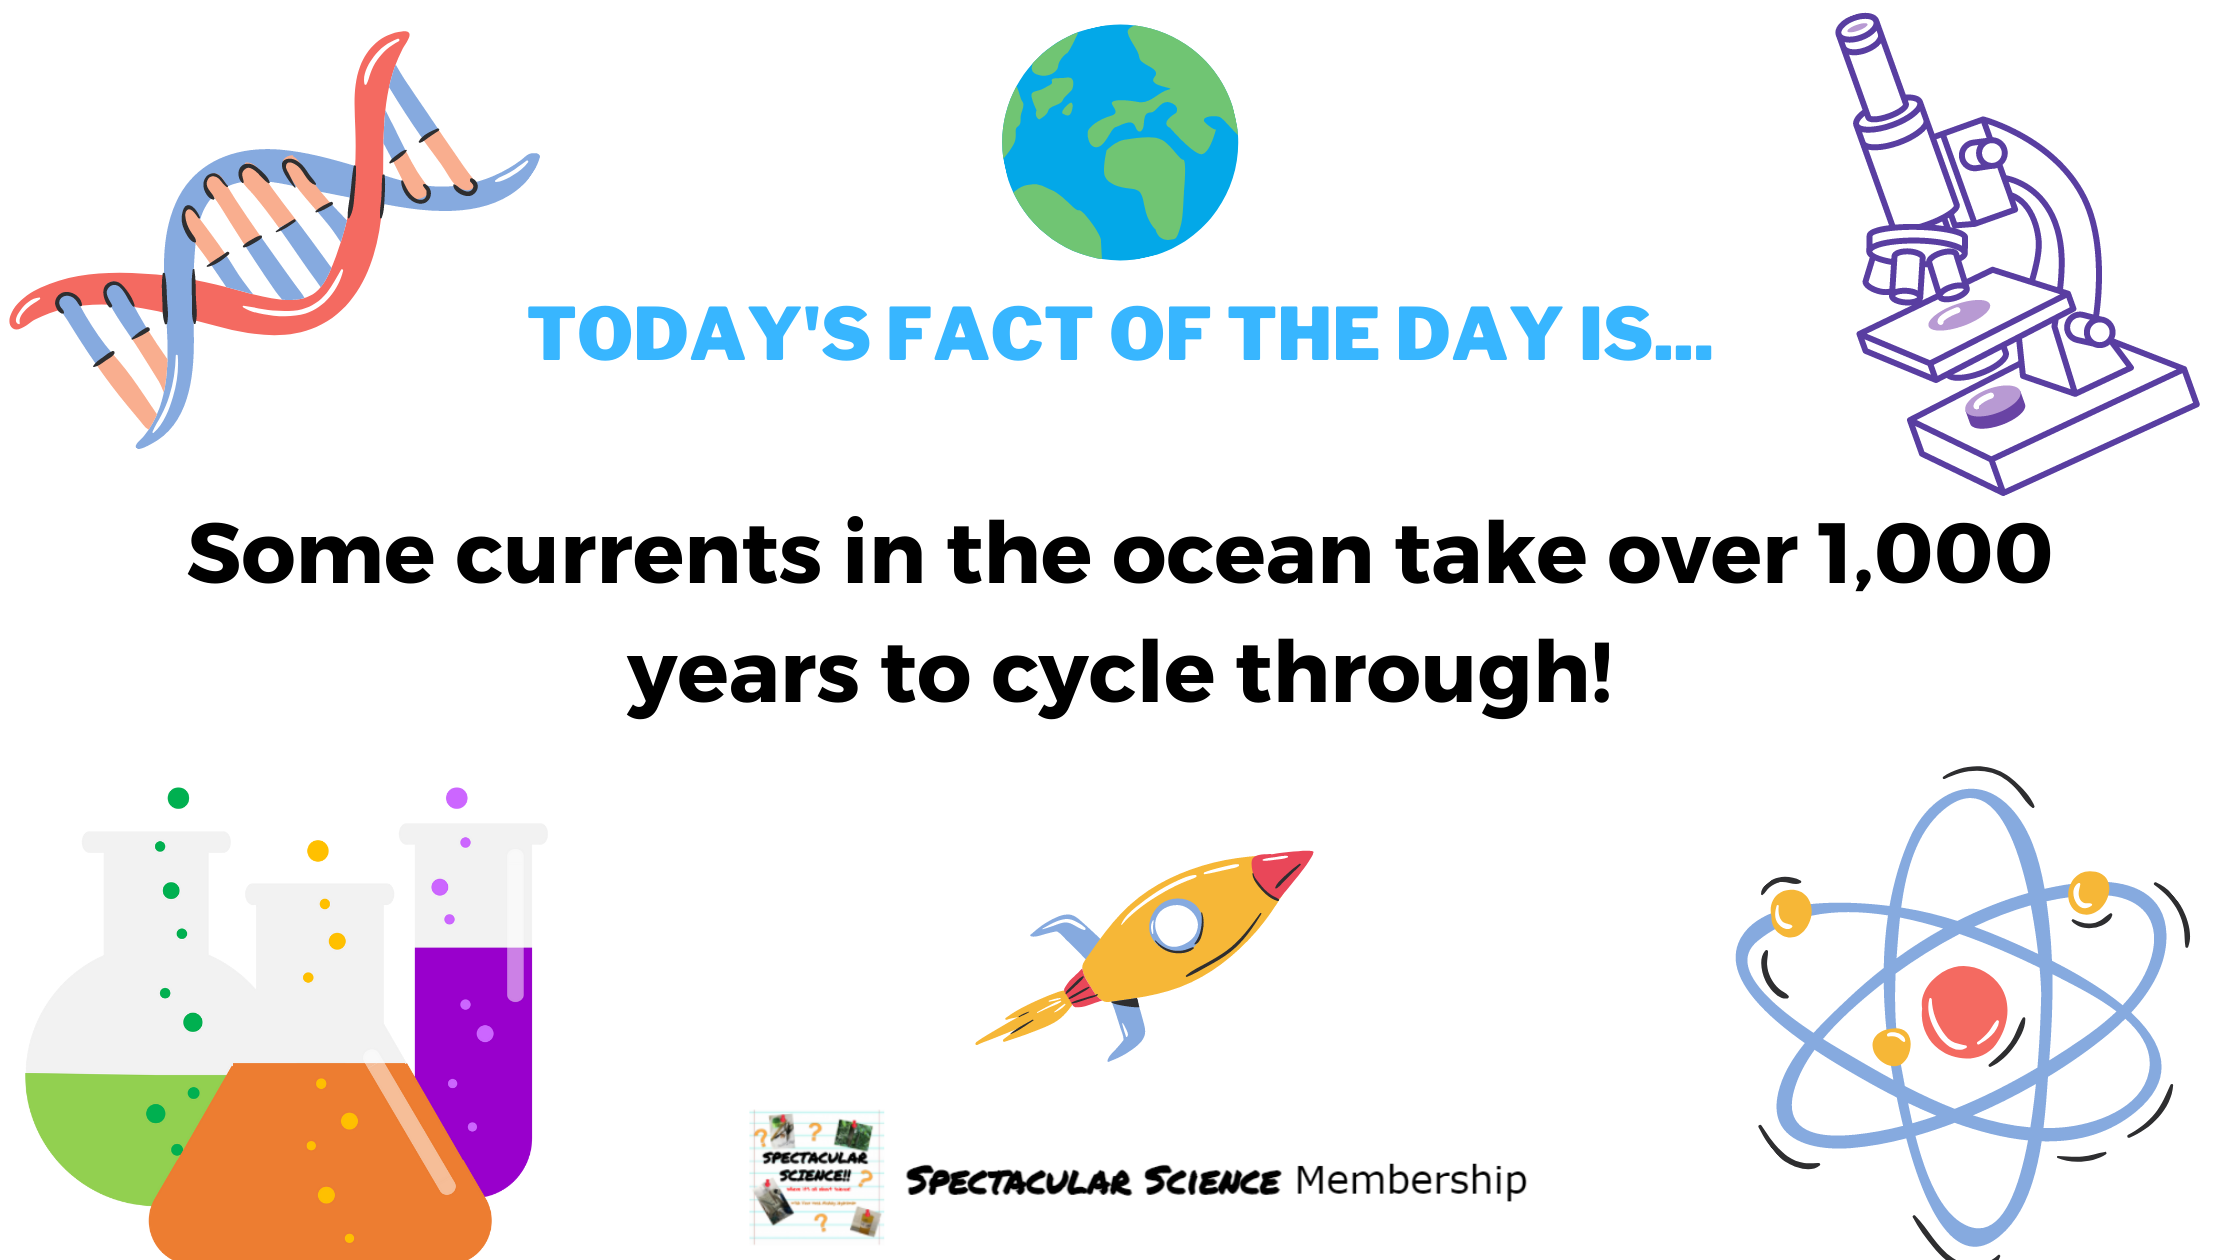 Fact of the Day Image Feb. 3rd